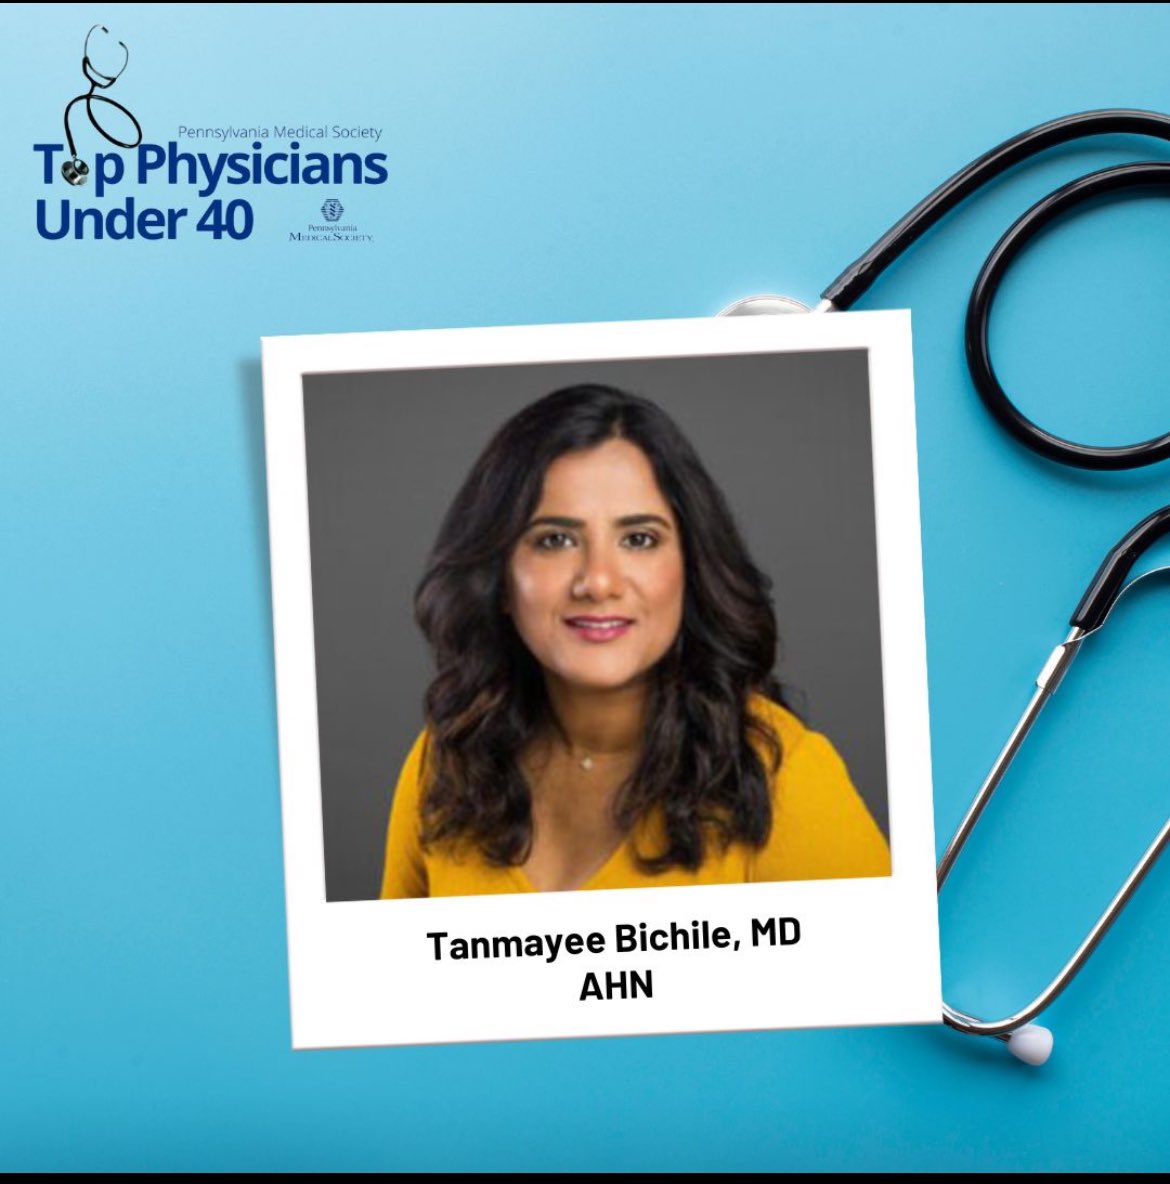 I am fortunate to work with an organization and colleagues that recognizes the hard work put in by its physicians. Receiving this honor has boosted my confidence and encourages me to keep doing my work well. @AHNMedicineInst @AHNRheum #40under40